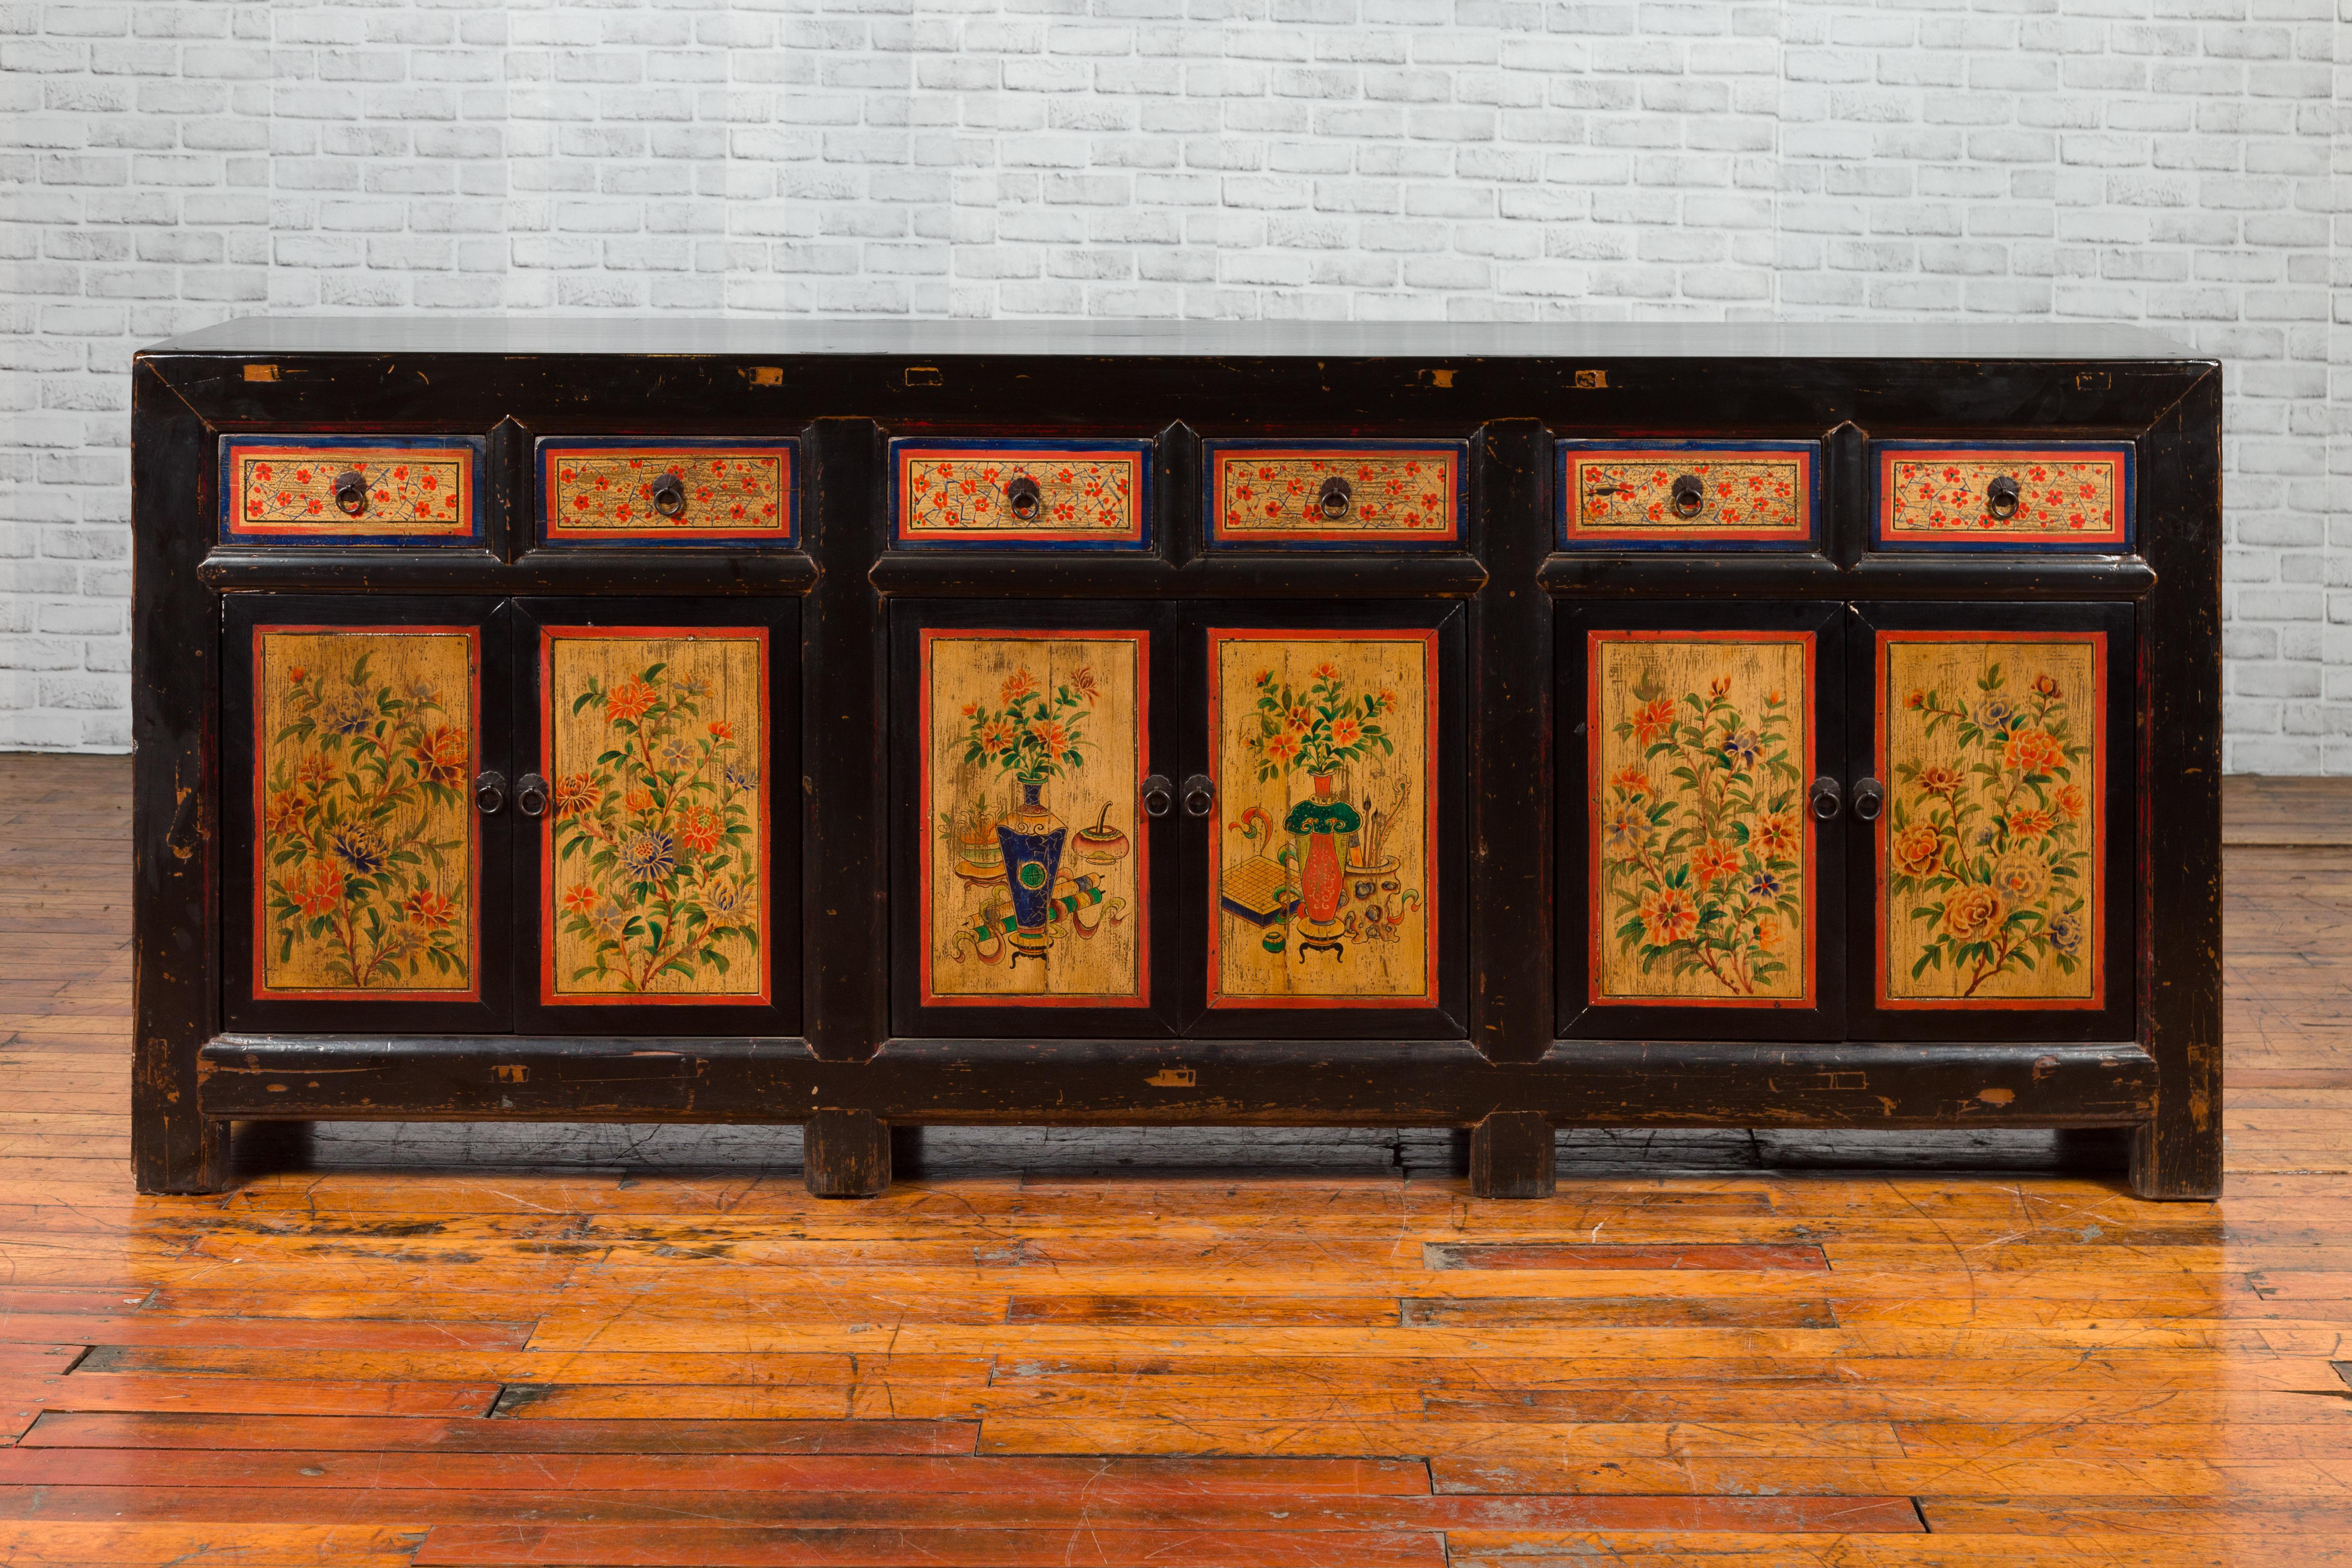 A Chinese black lacquered Gansu sideboard from the early 20th century, with hand painted floral and vase motifs. Created in the North-Center province of China, called Gansu during the early years of the 20th century, this sideboard features a black